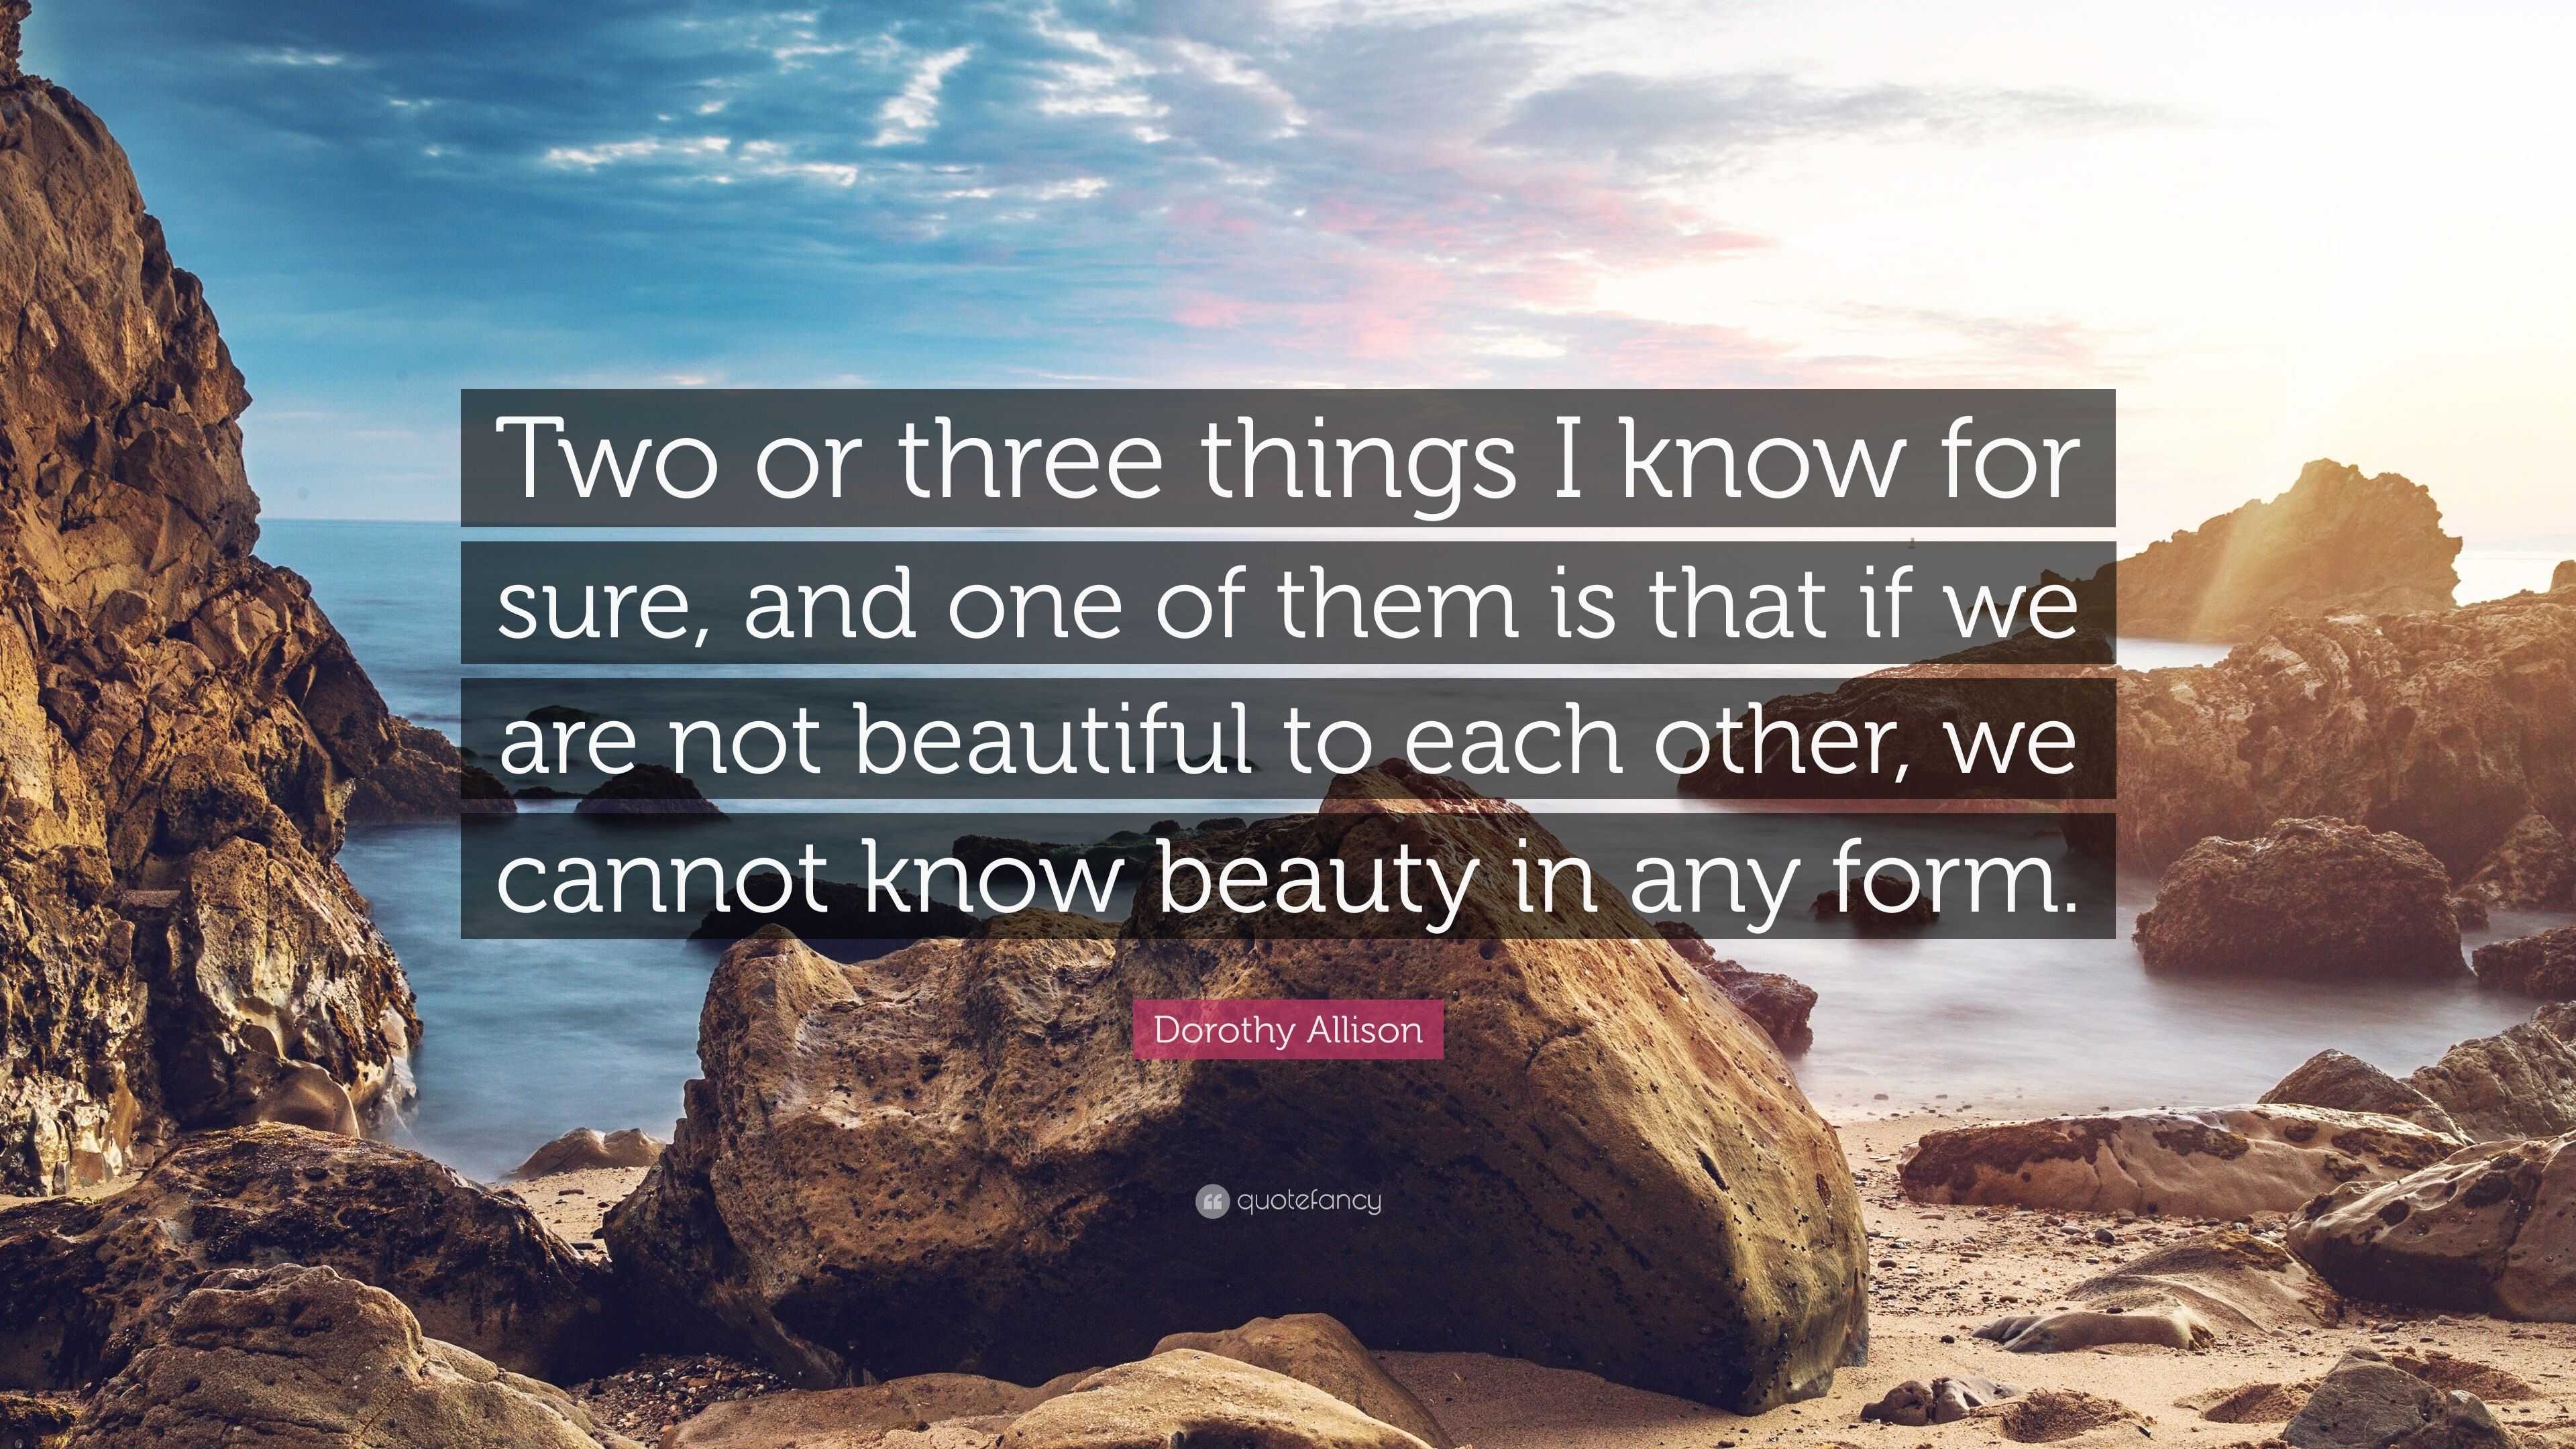 Dorothy Allison Quote: “Two or three things I know for sure, and one of ...